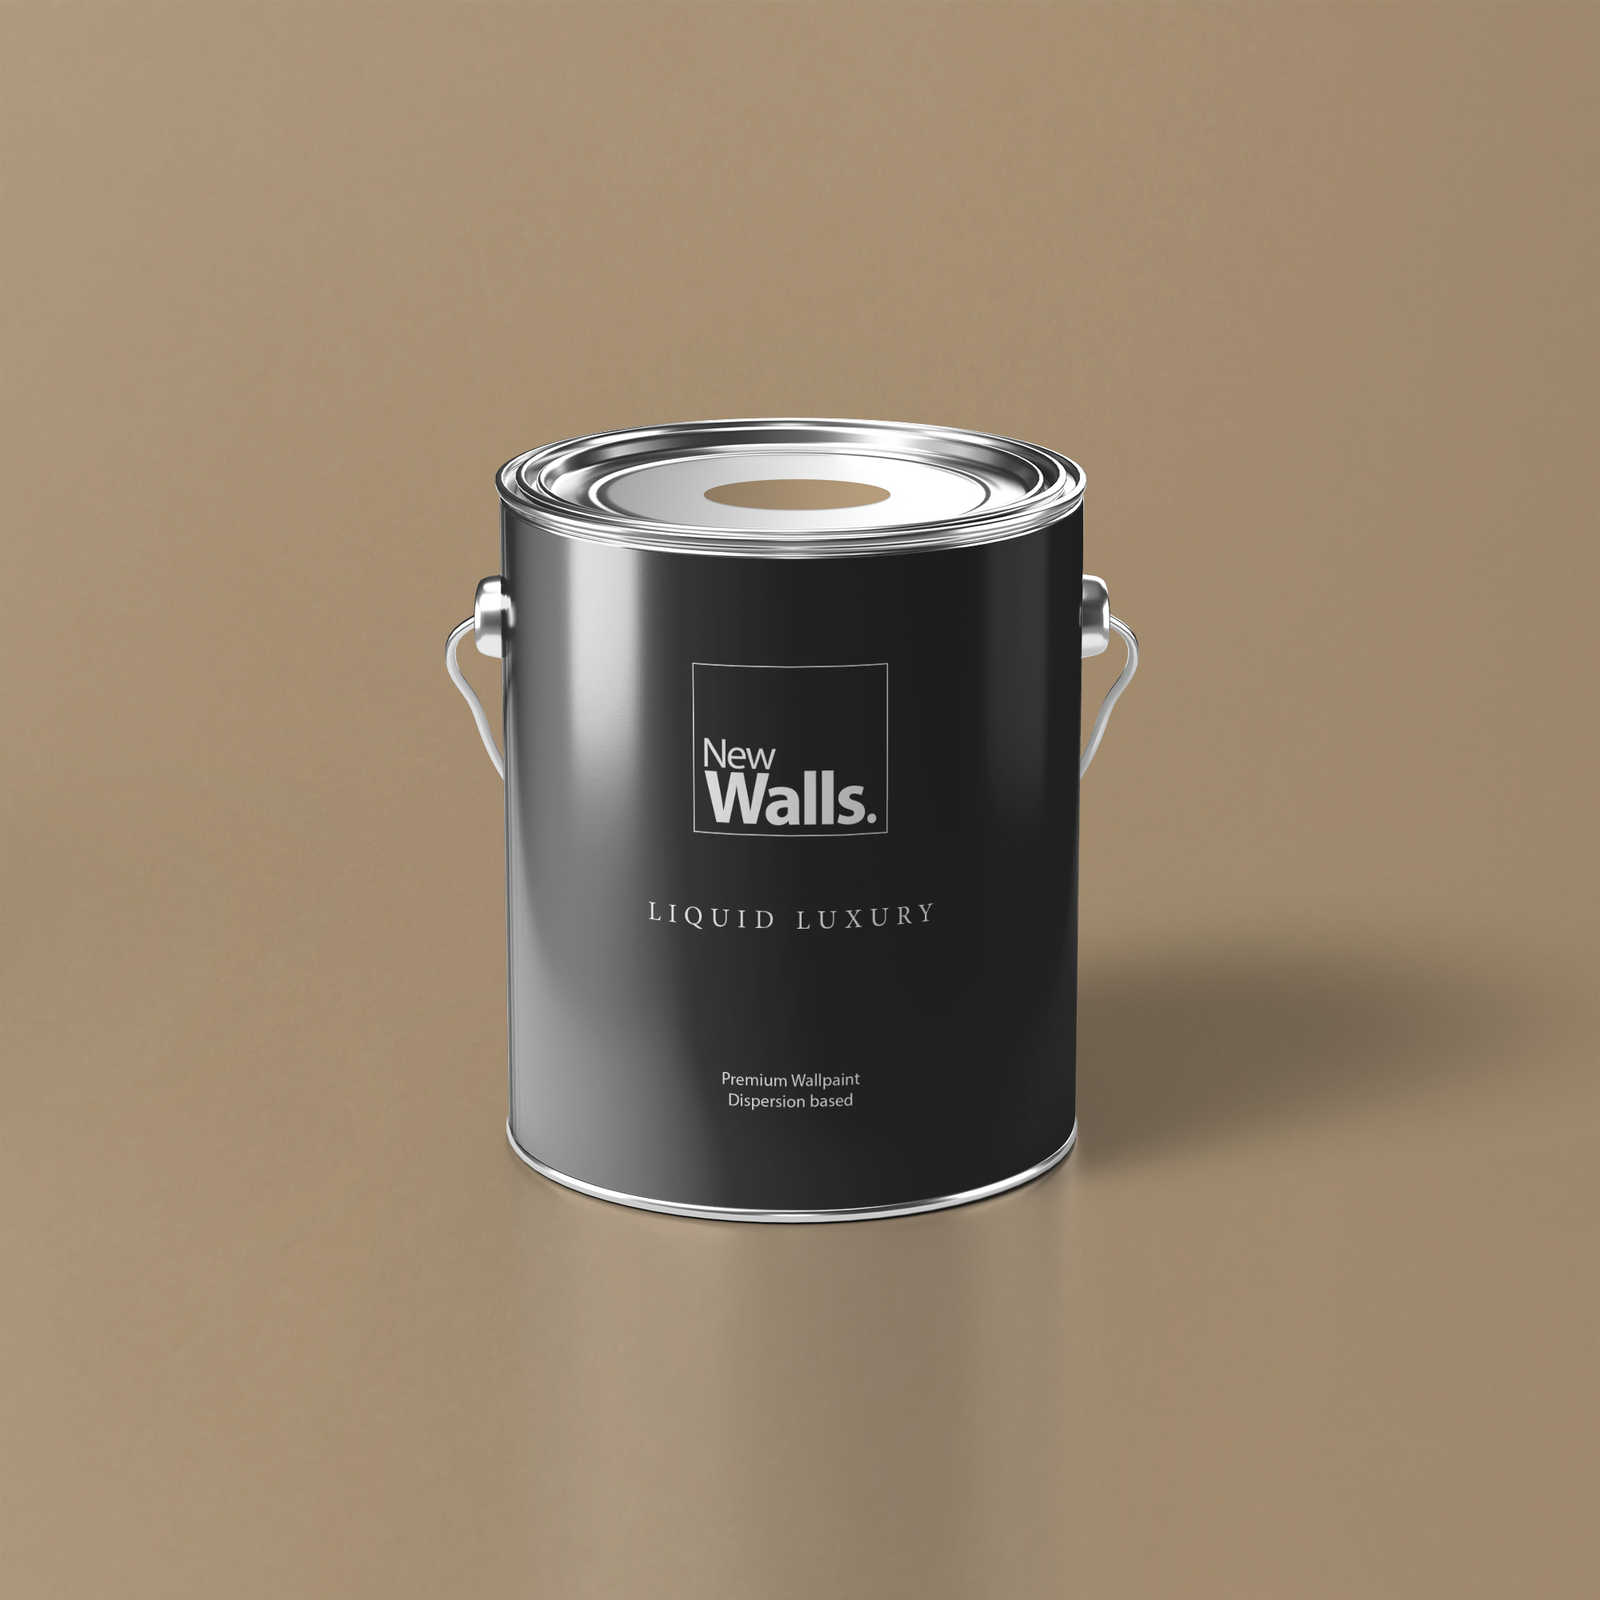 Premium Wall Paint Nature Cappuccino »Essential Earth« NW710 – 5 litre
